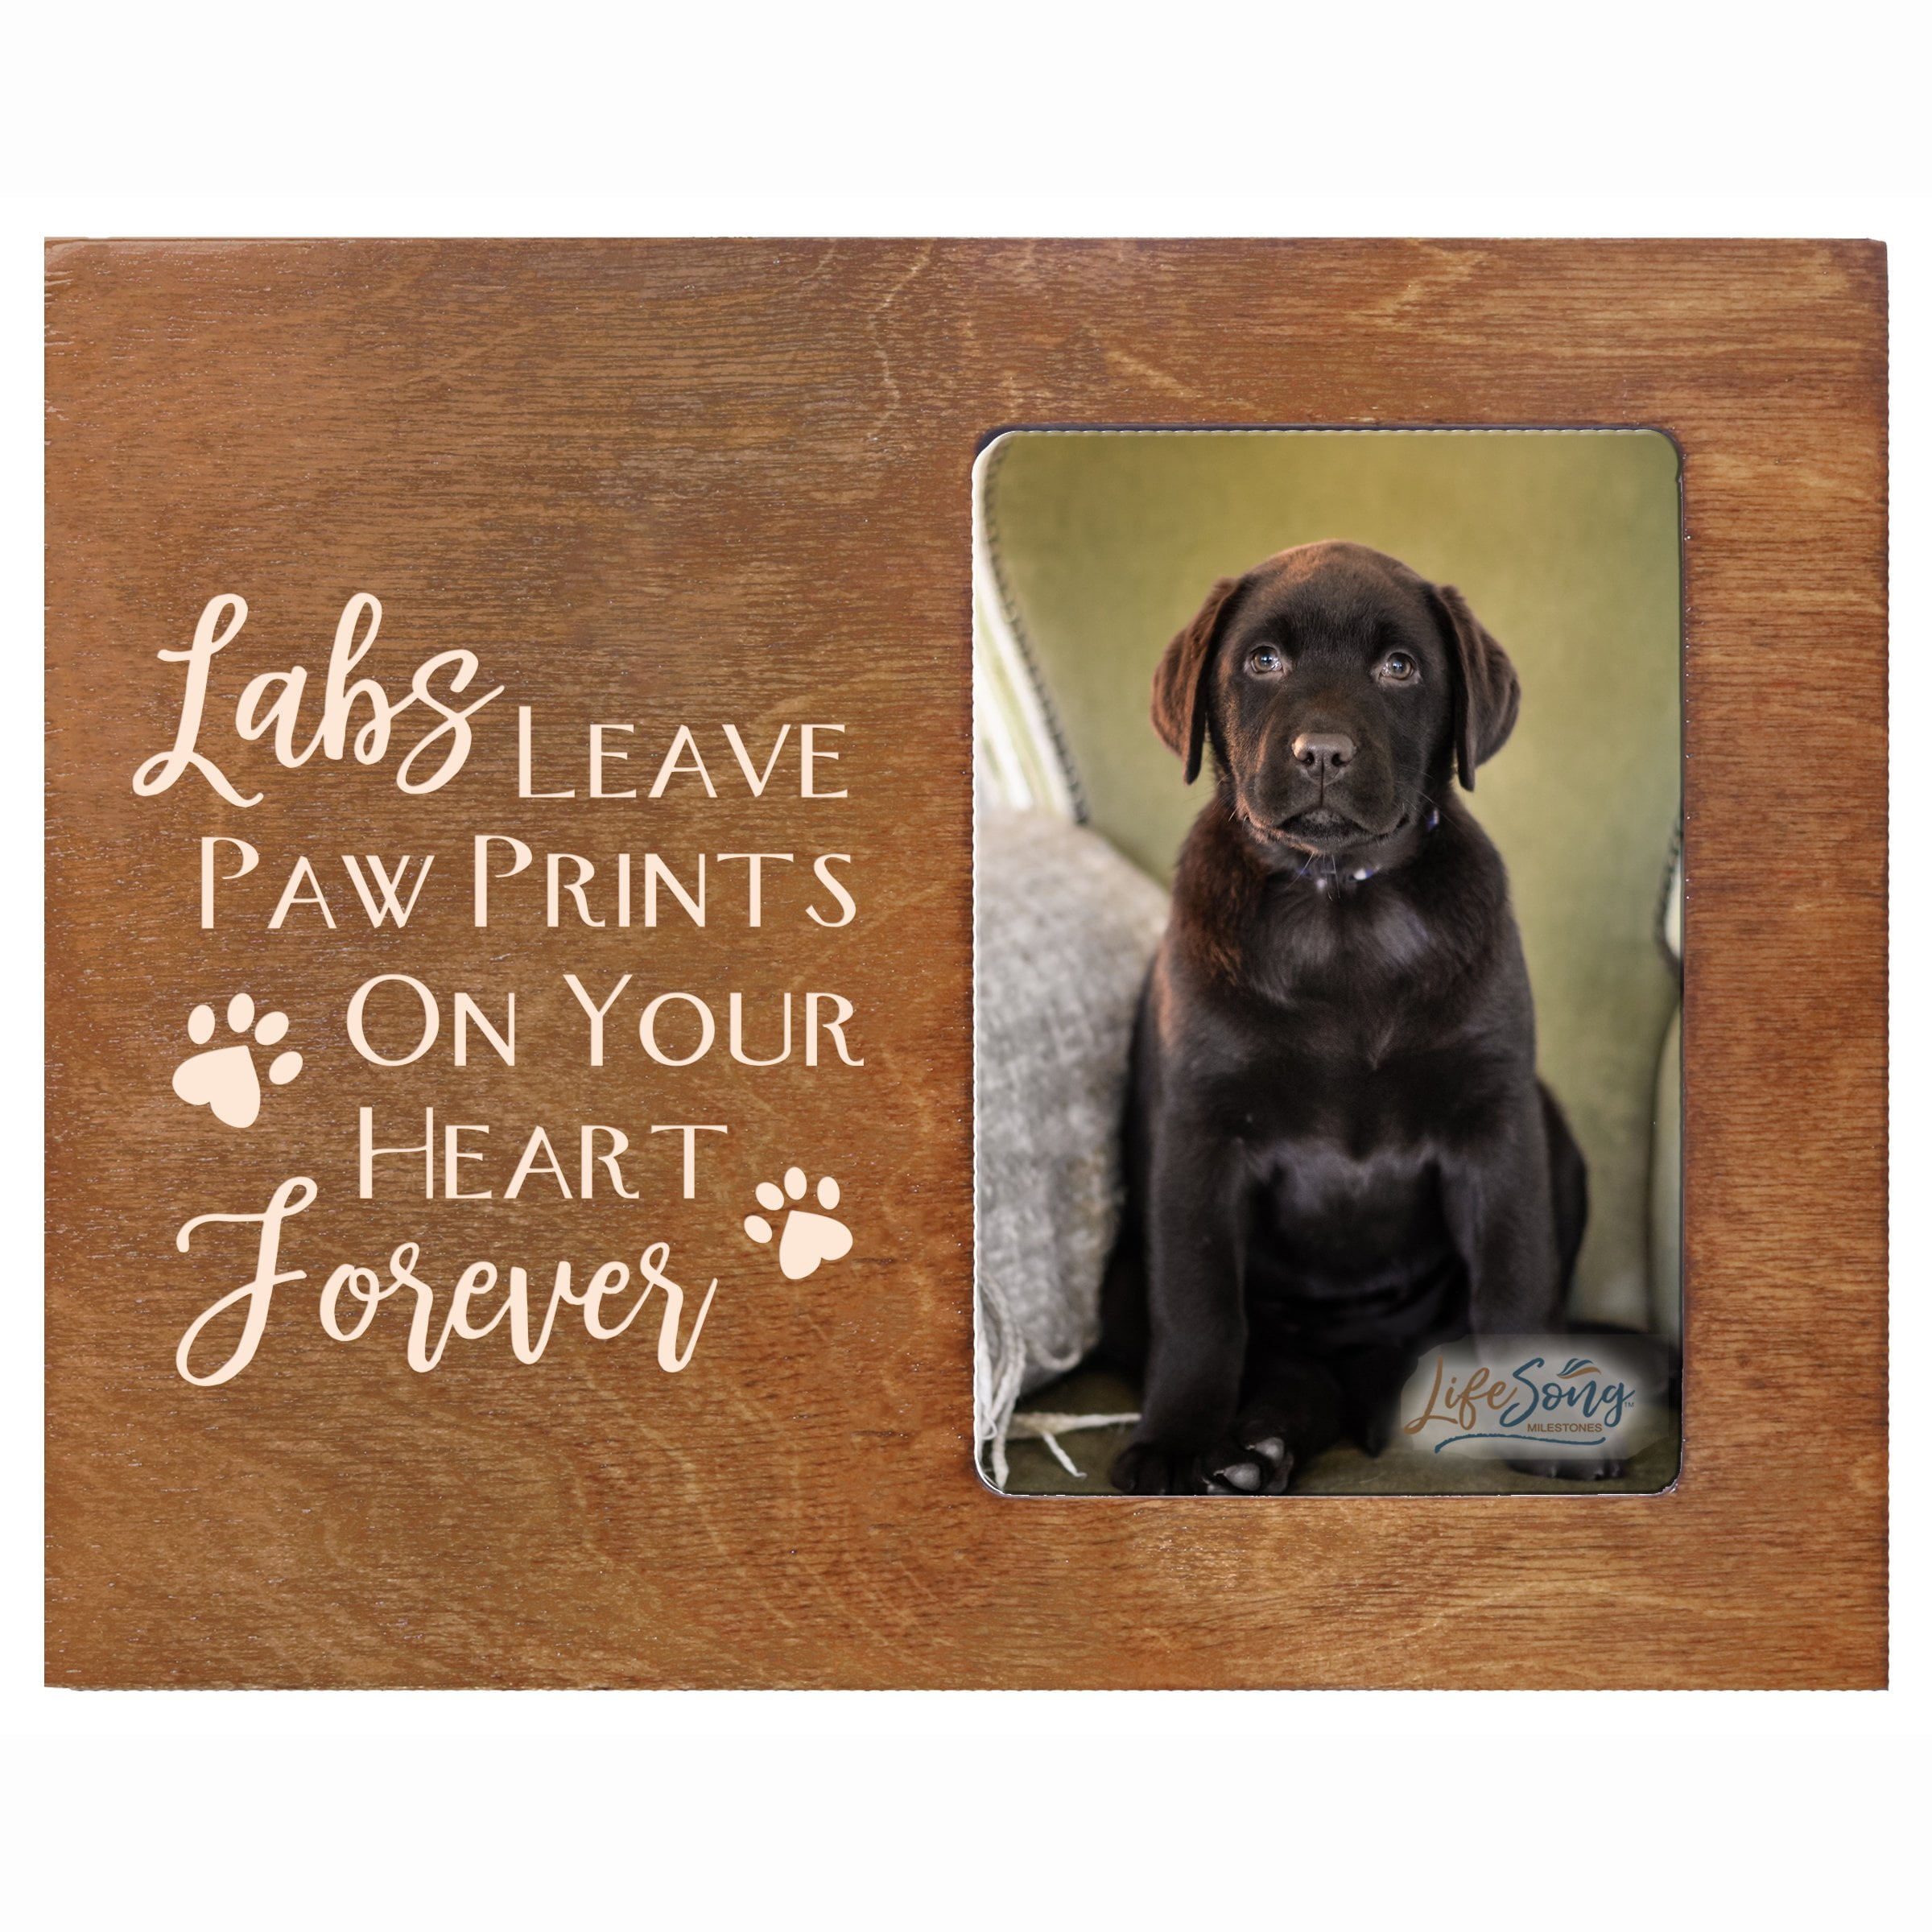 DOGS LEAVE PAWPRINTS on Your Heart  sign Wooden Dog Puppy animal pet decor 4x6" 